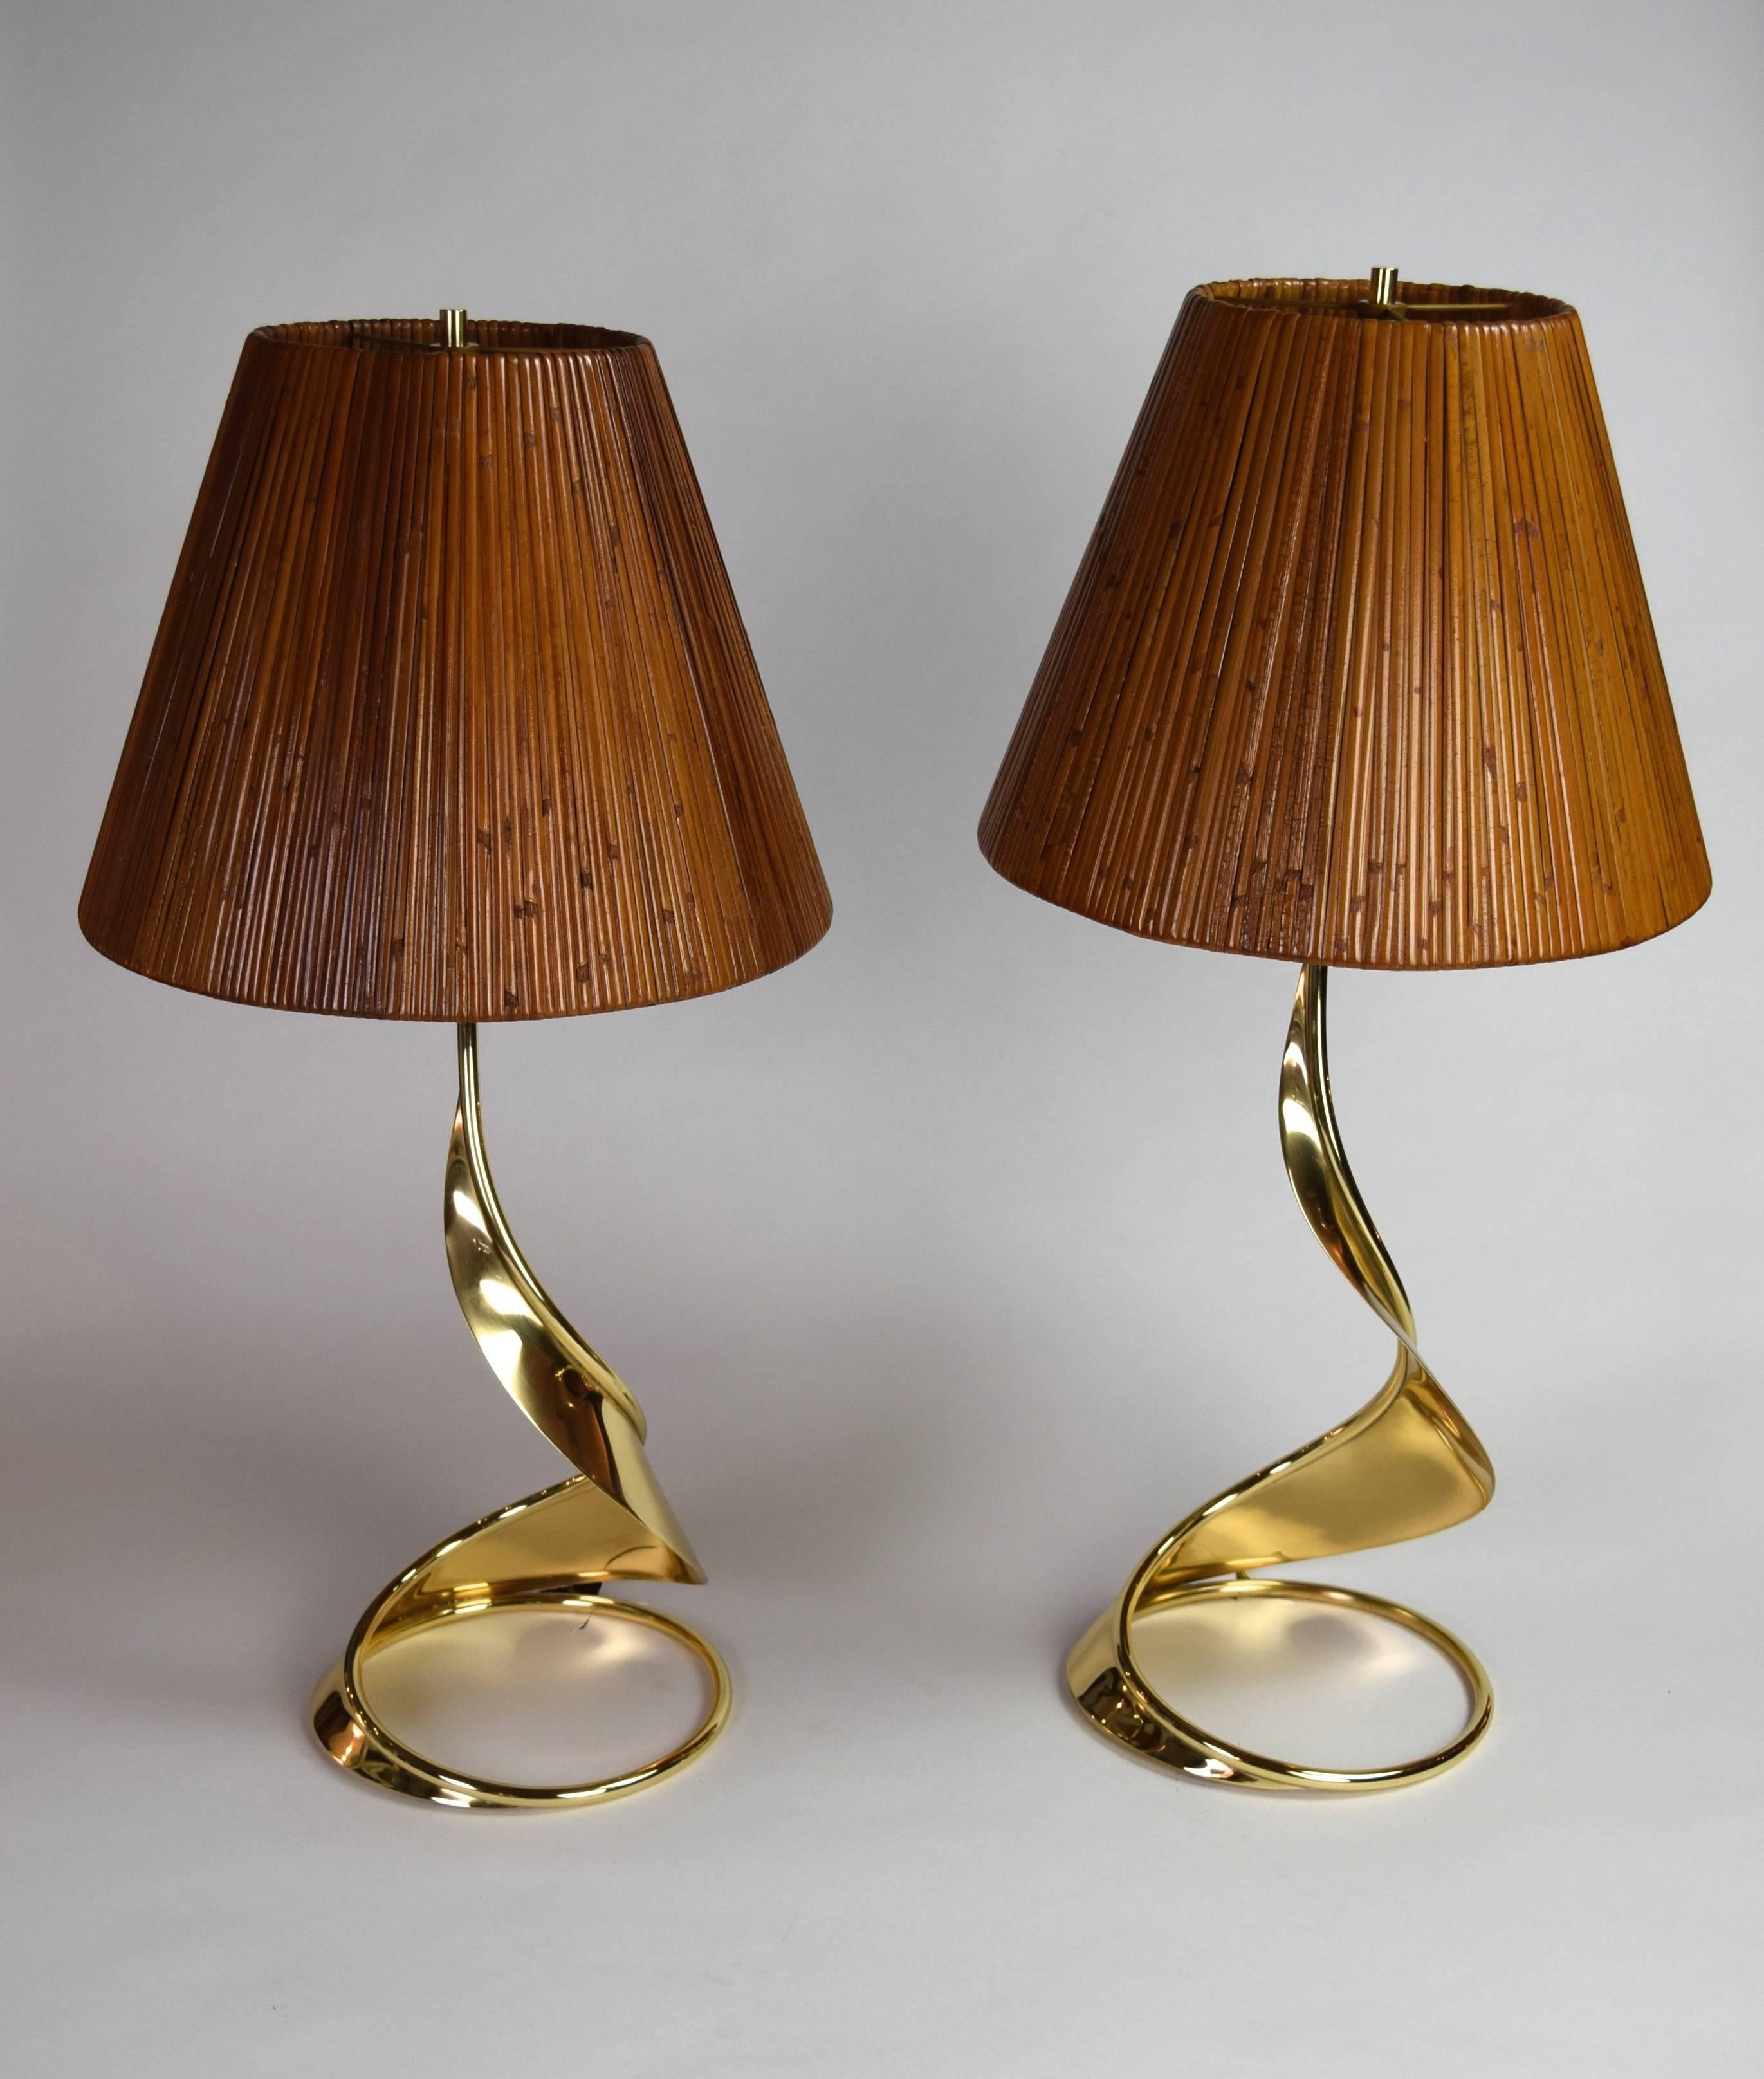 Each lamp has a circular ring base spiraling upward to support a bamboo shade. Incised with indecipherable signature.